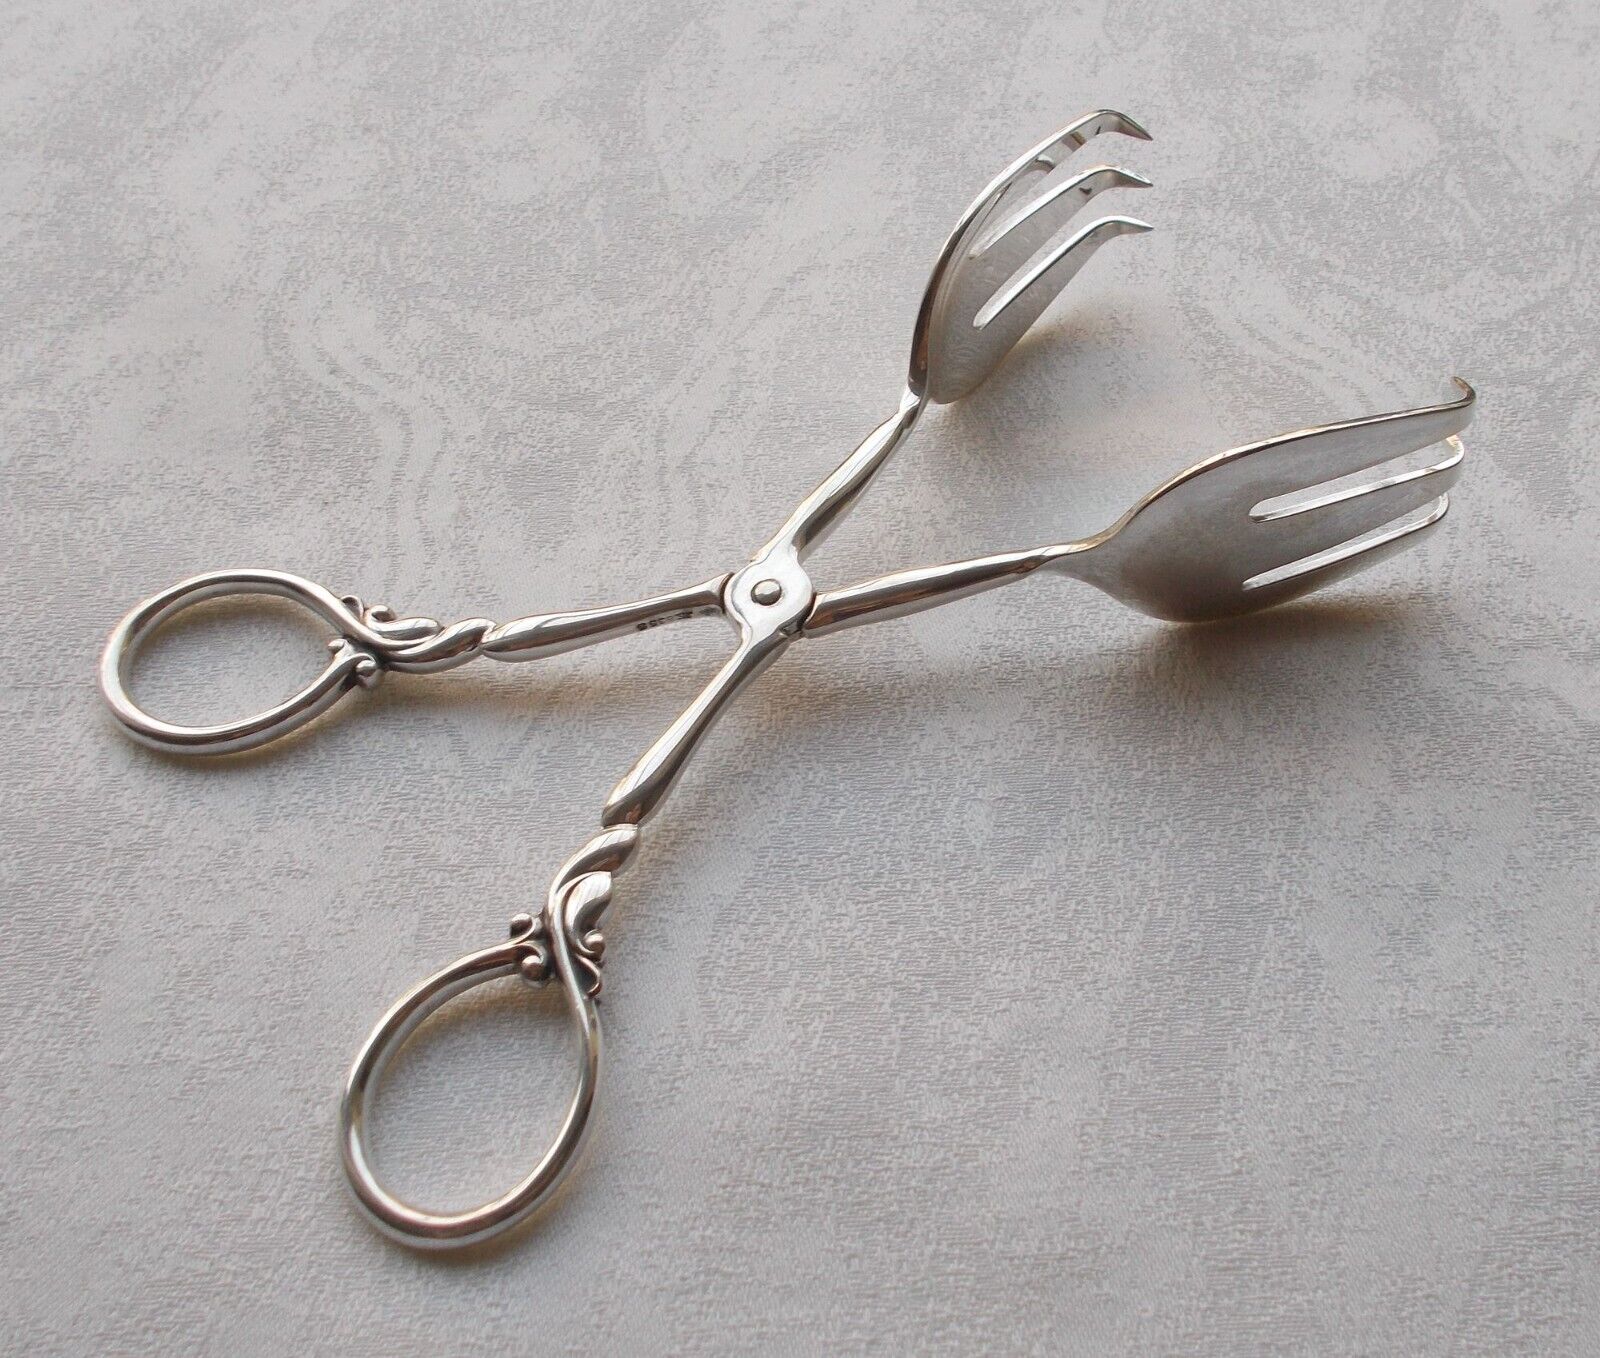 Rare Danish Design Big Pastry Tongs From 835er Silver From Wilkens & Pressure